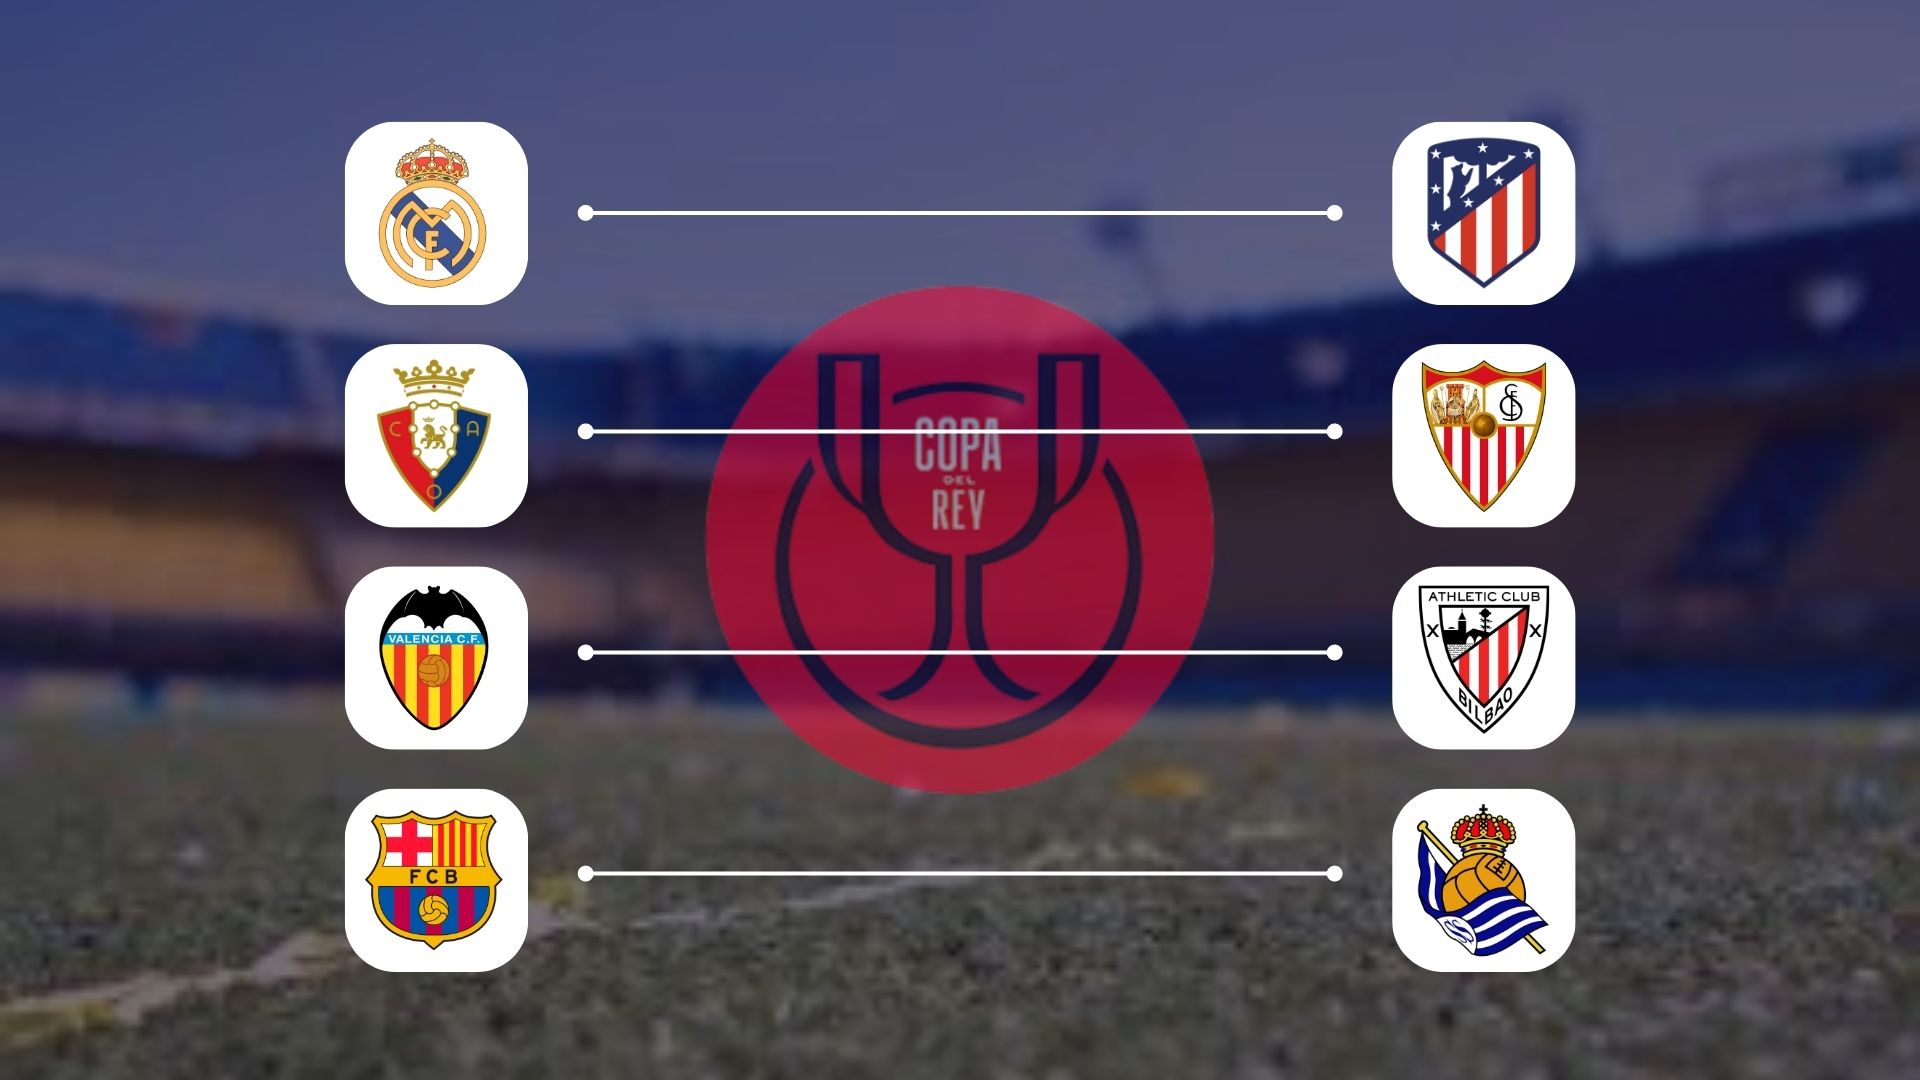 Copa Del Rey QuarterFinal Draw When and Where to Watch Online